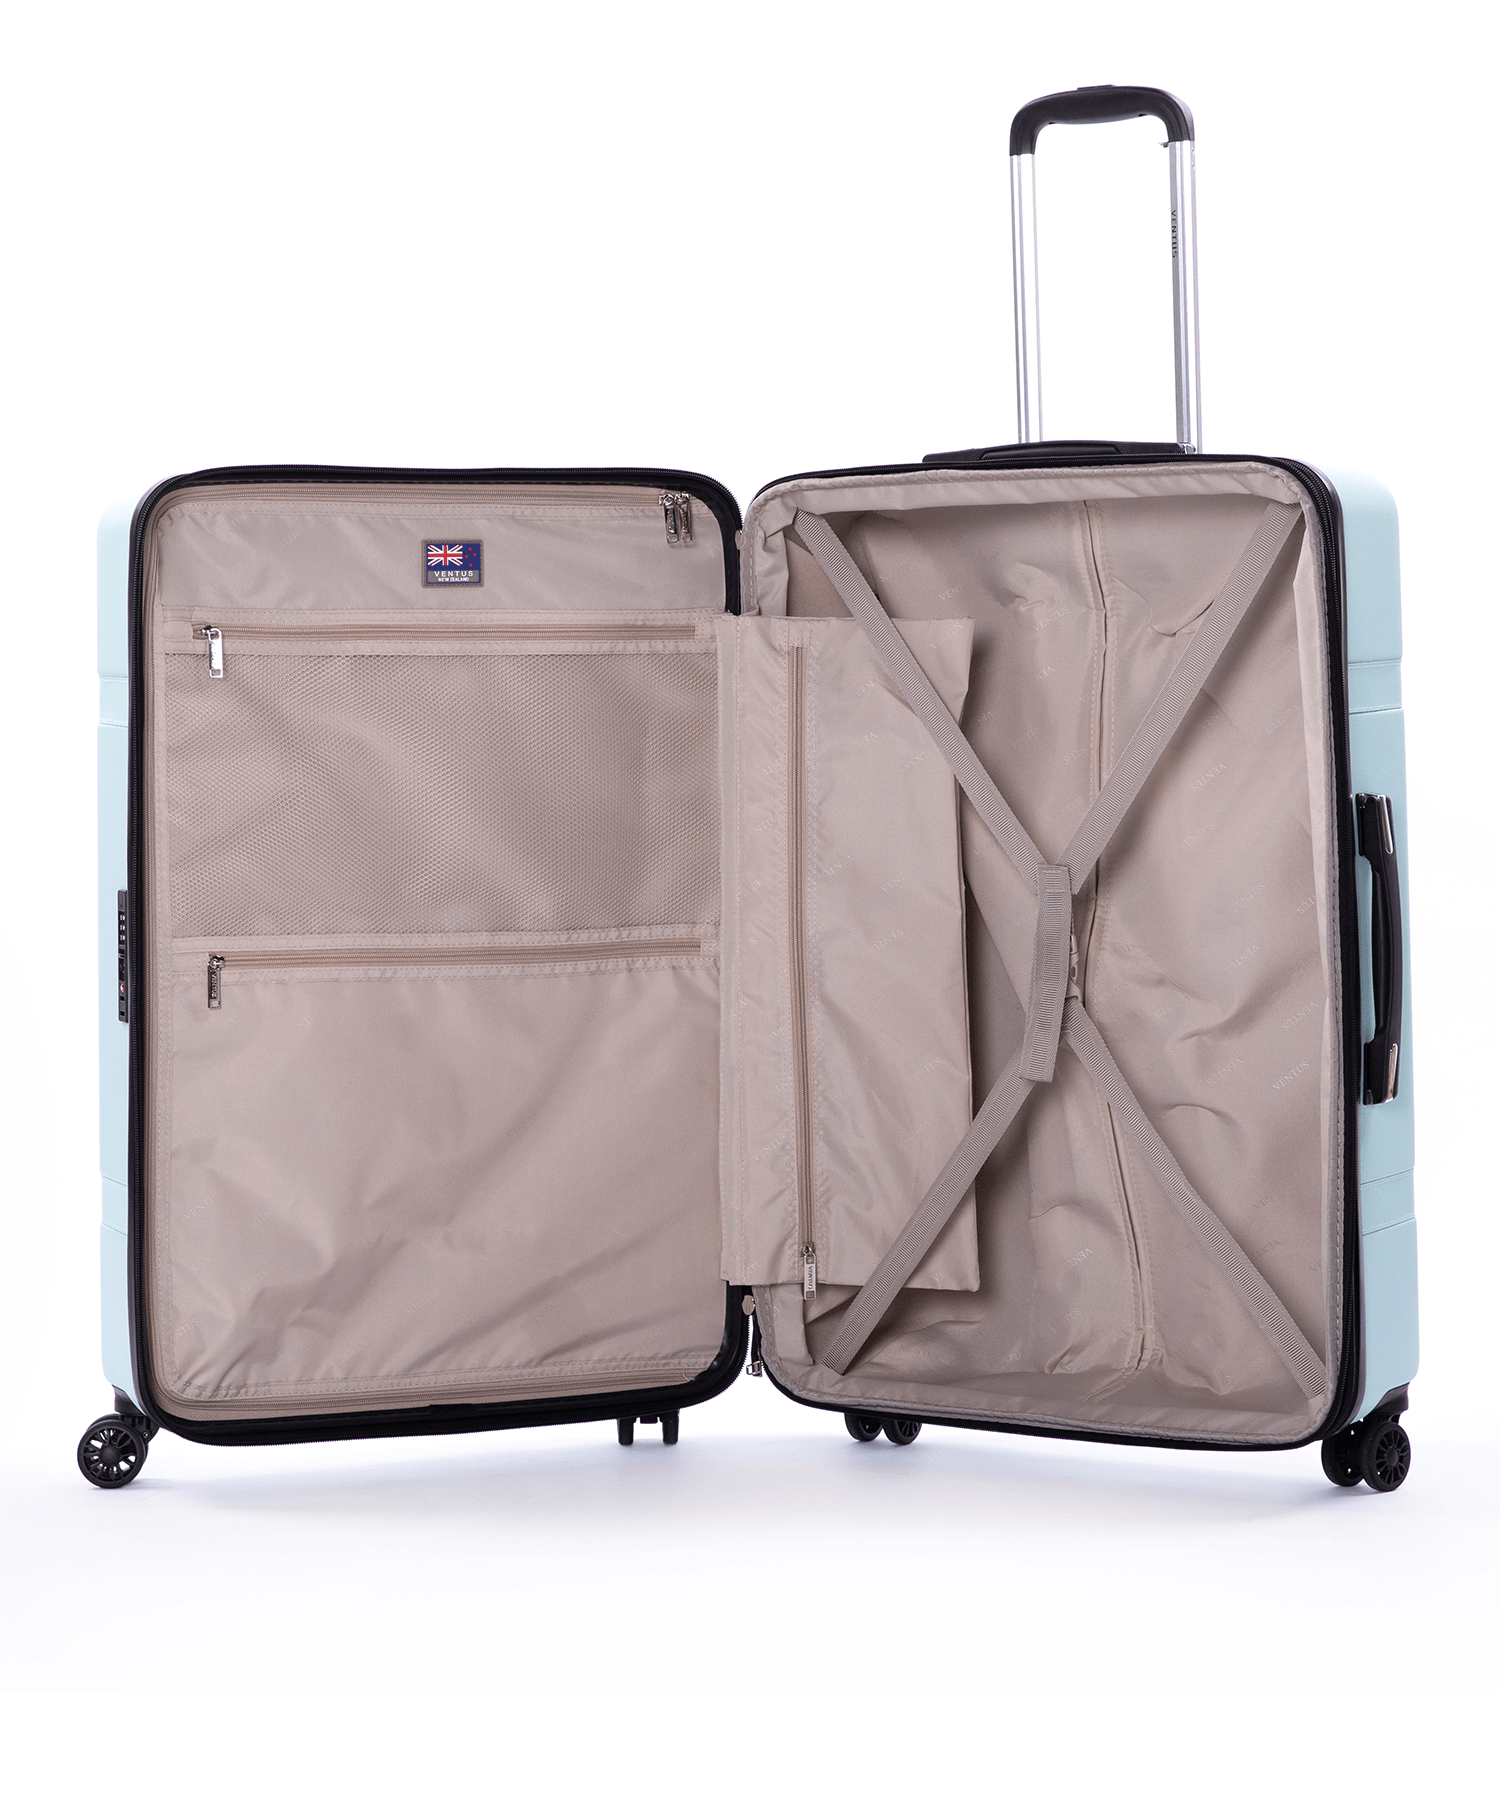 Ventus Strapped Spinner 77cm Suitcase - San Michelle Bags suitcase nz